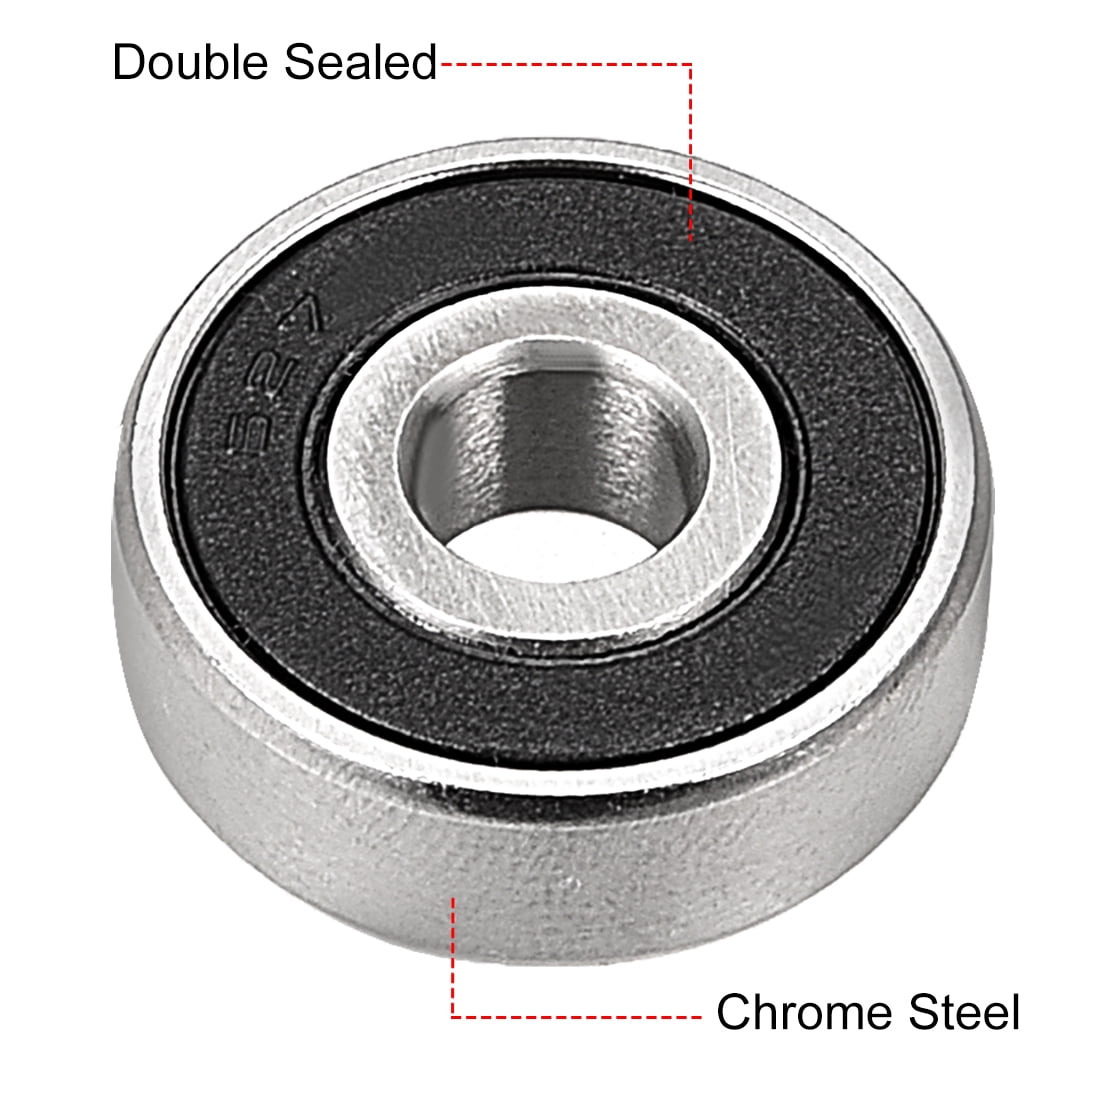 uxcell 627-2RS Deep Groove Ball Bearing Double Sealed 180027 Pack of 20 7mm x 22mm x 7mm Chrome Steel Bearings 